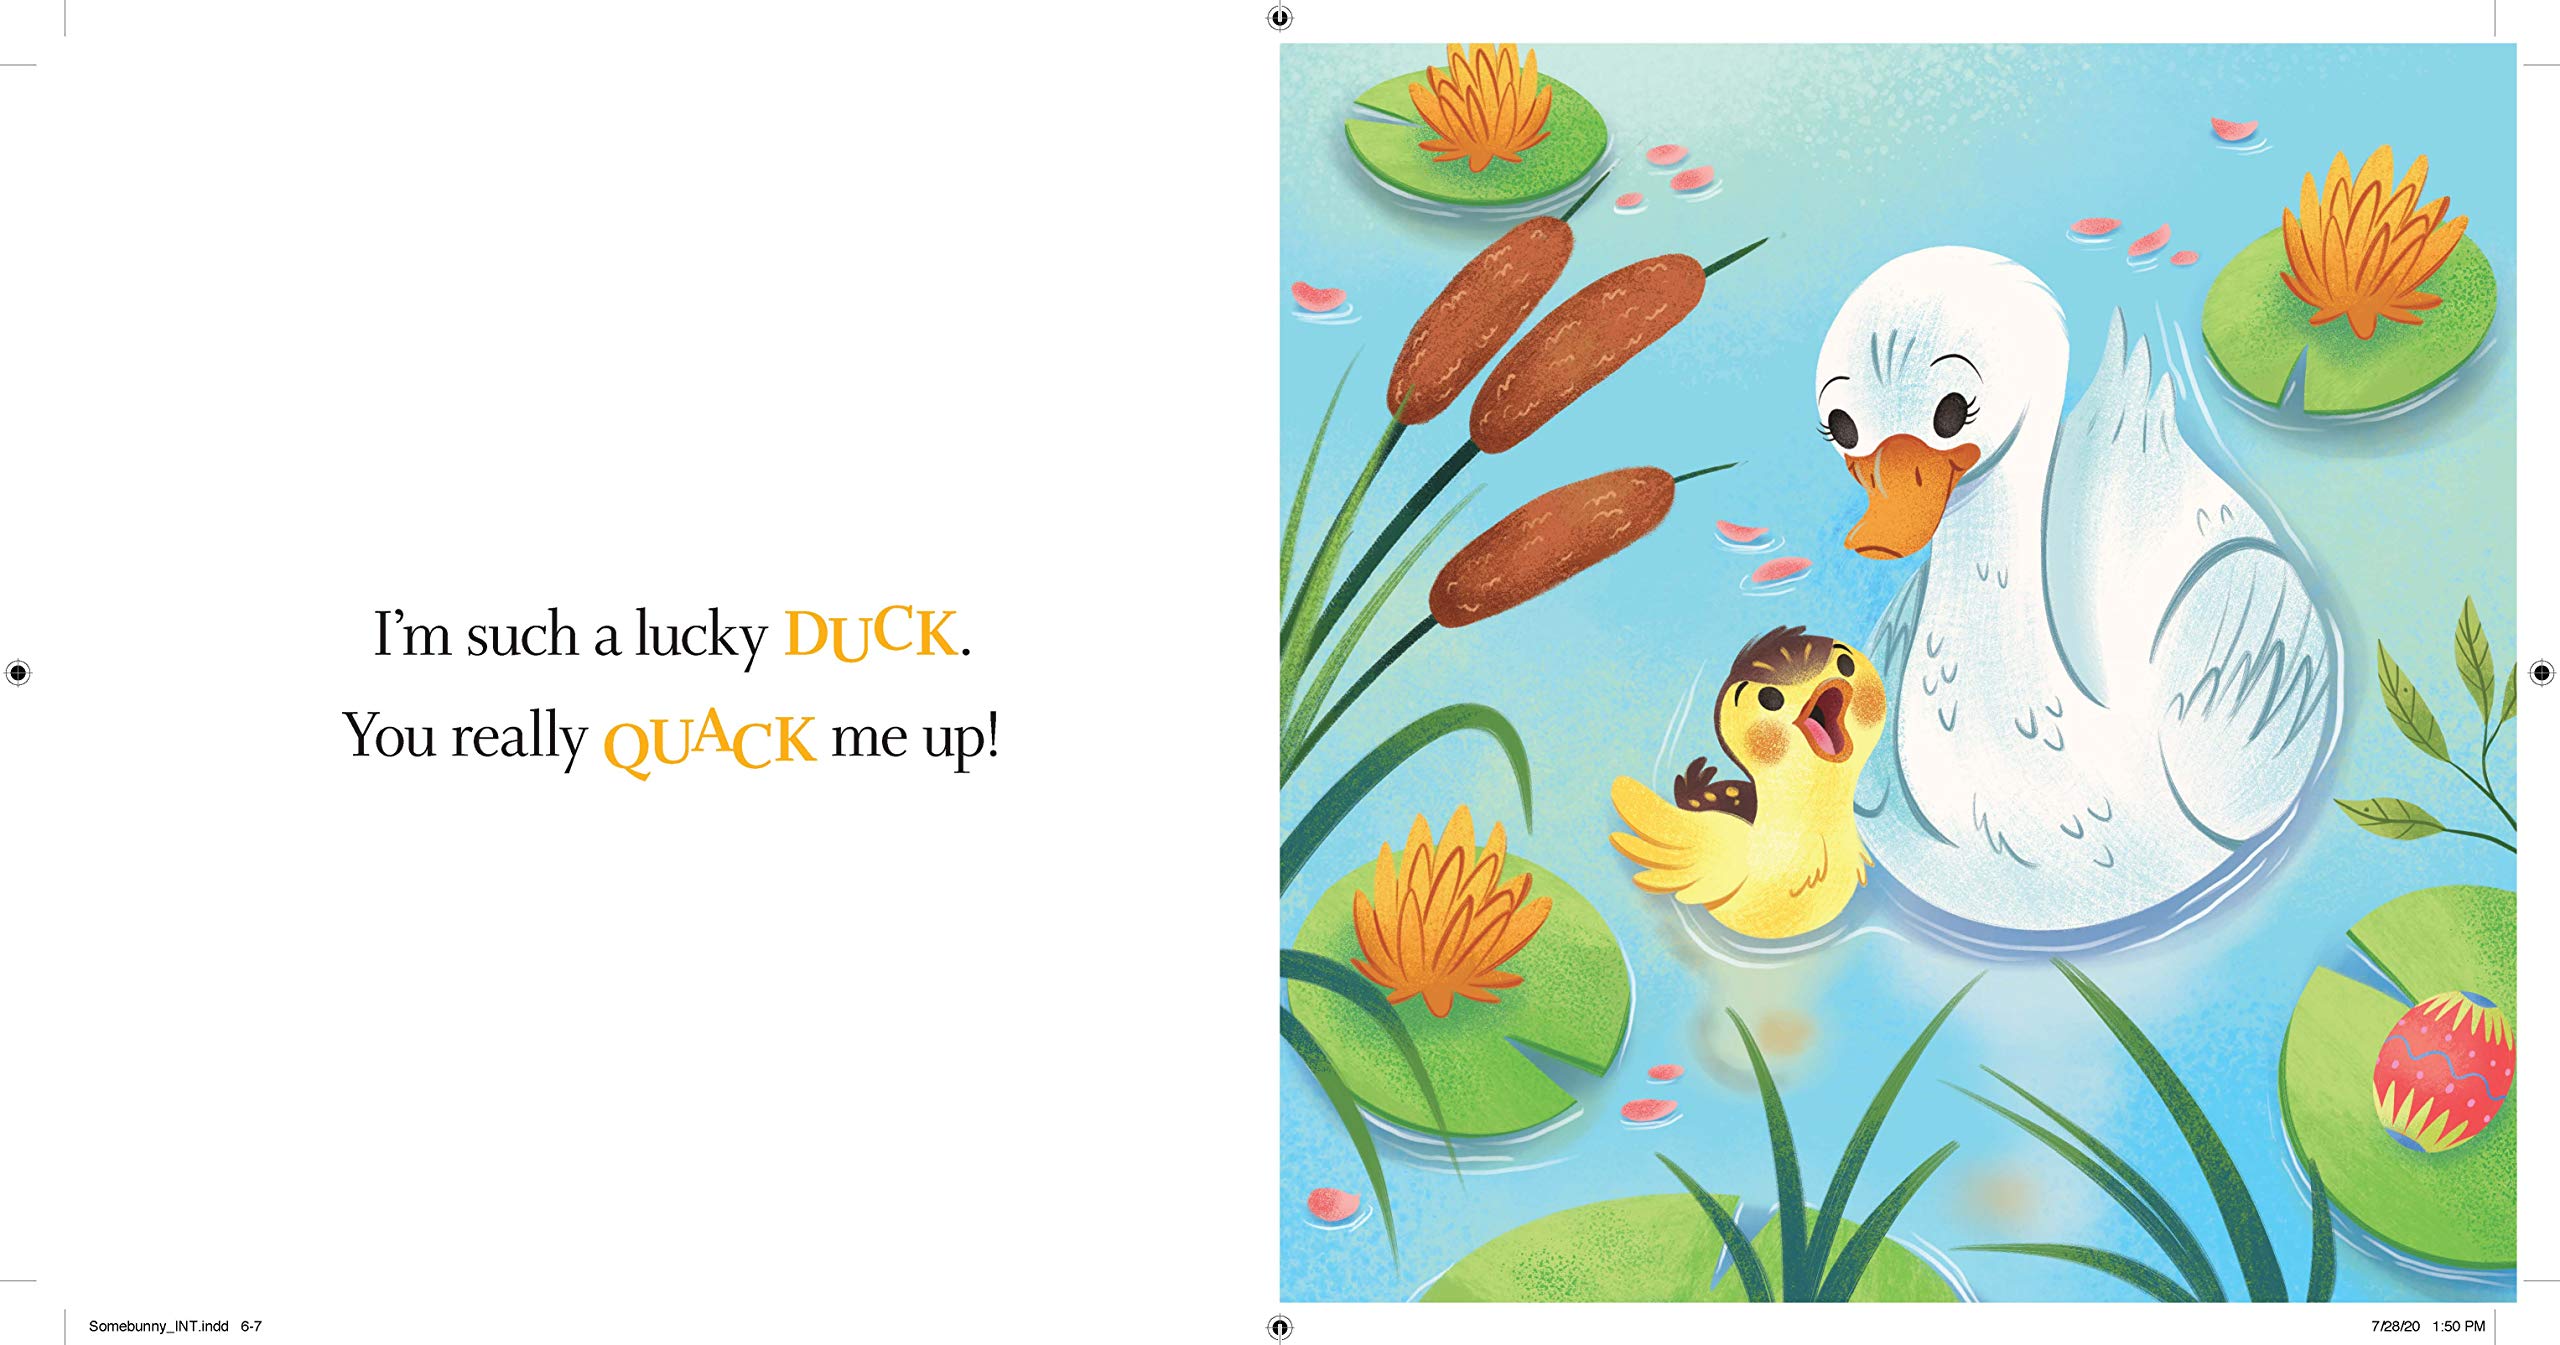 Somebunny Loves You: A Sweet and Silly Baby Animal Book for Toddlers (Punderland)